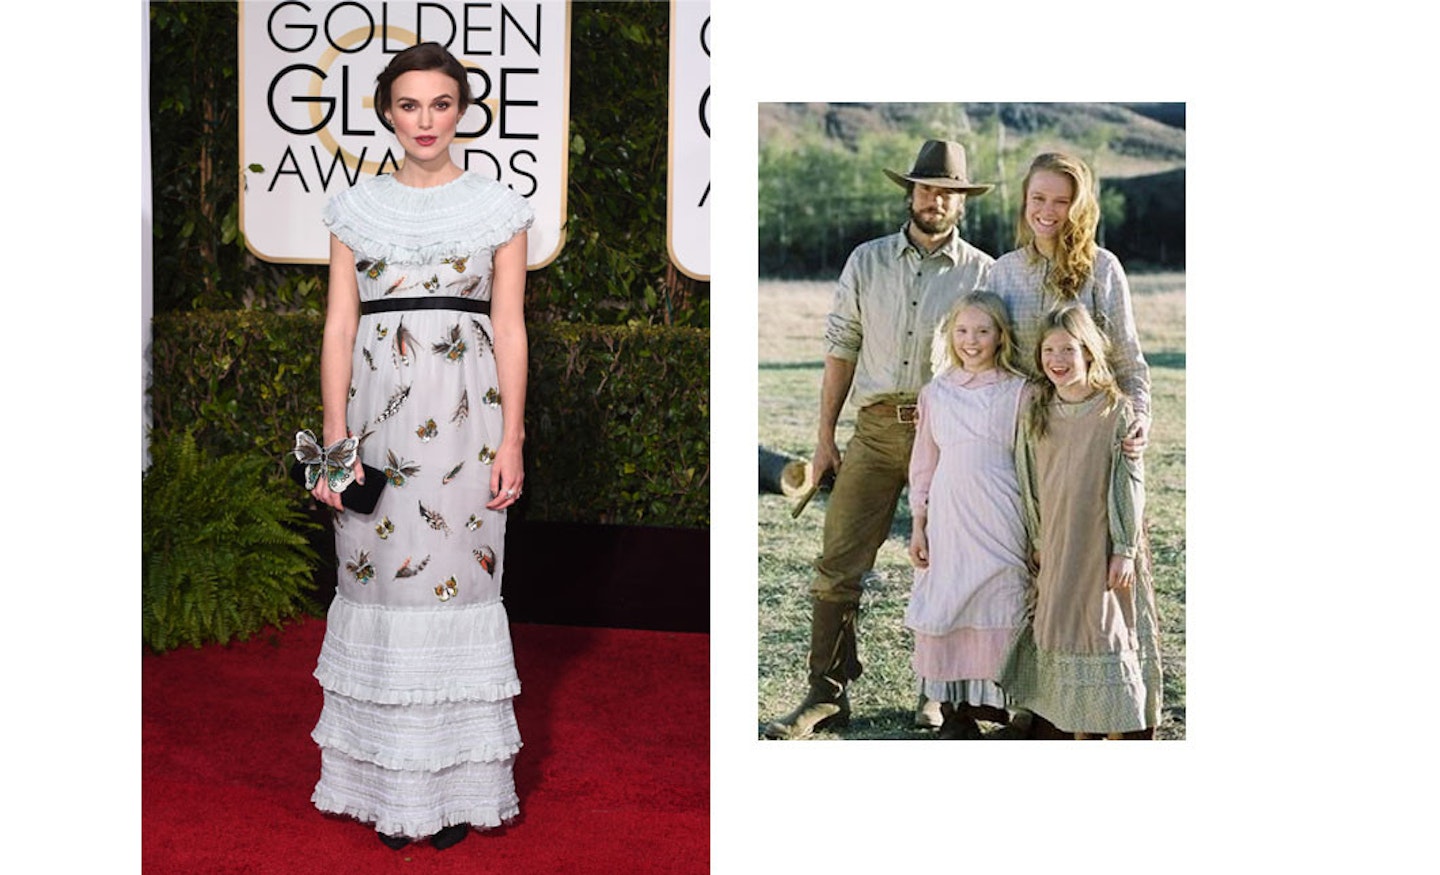 Keira Knightley serving up Little House on the Prairie realness!